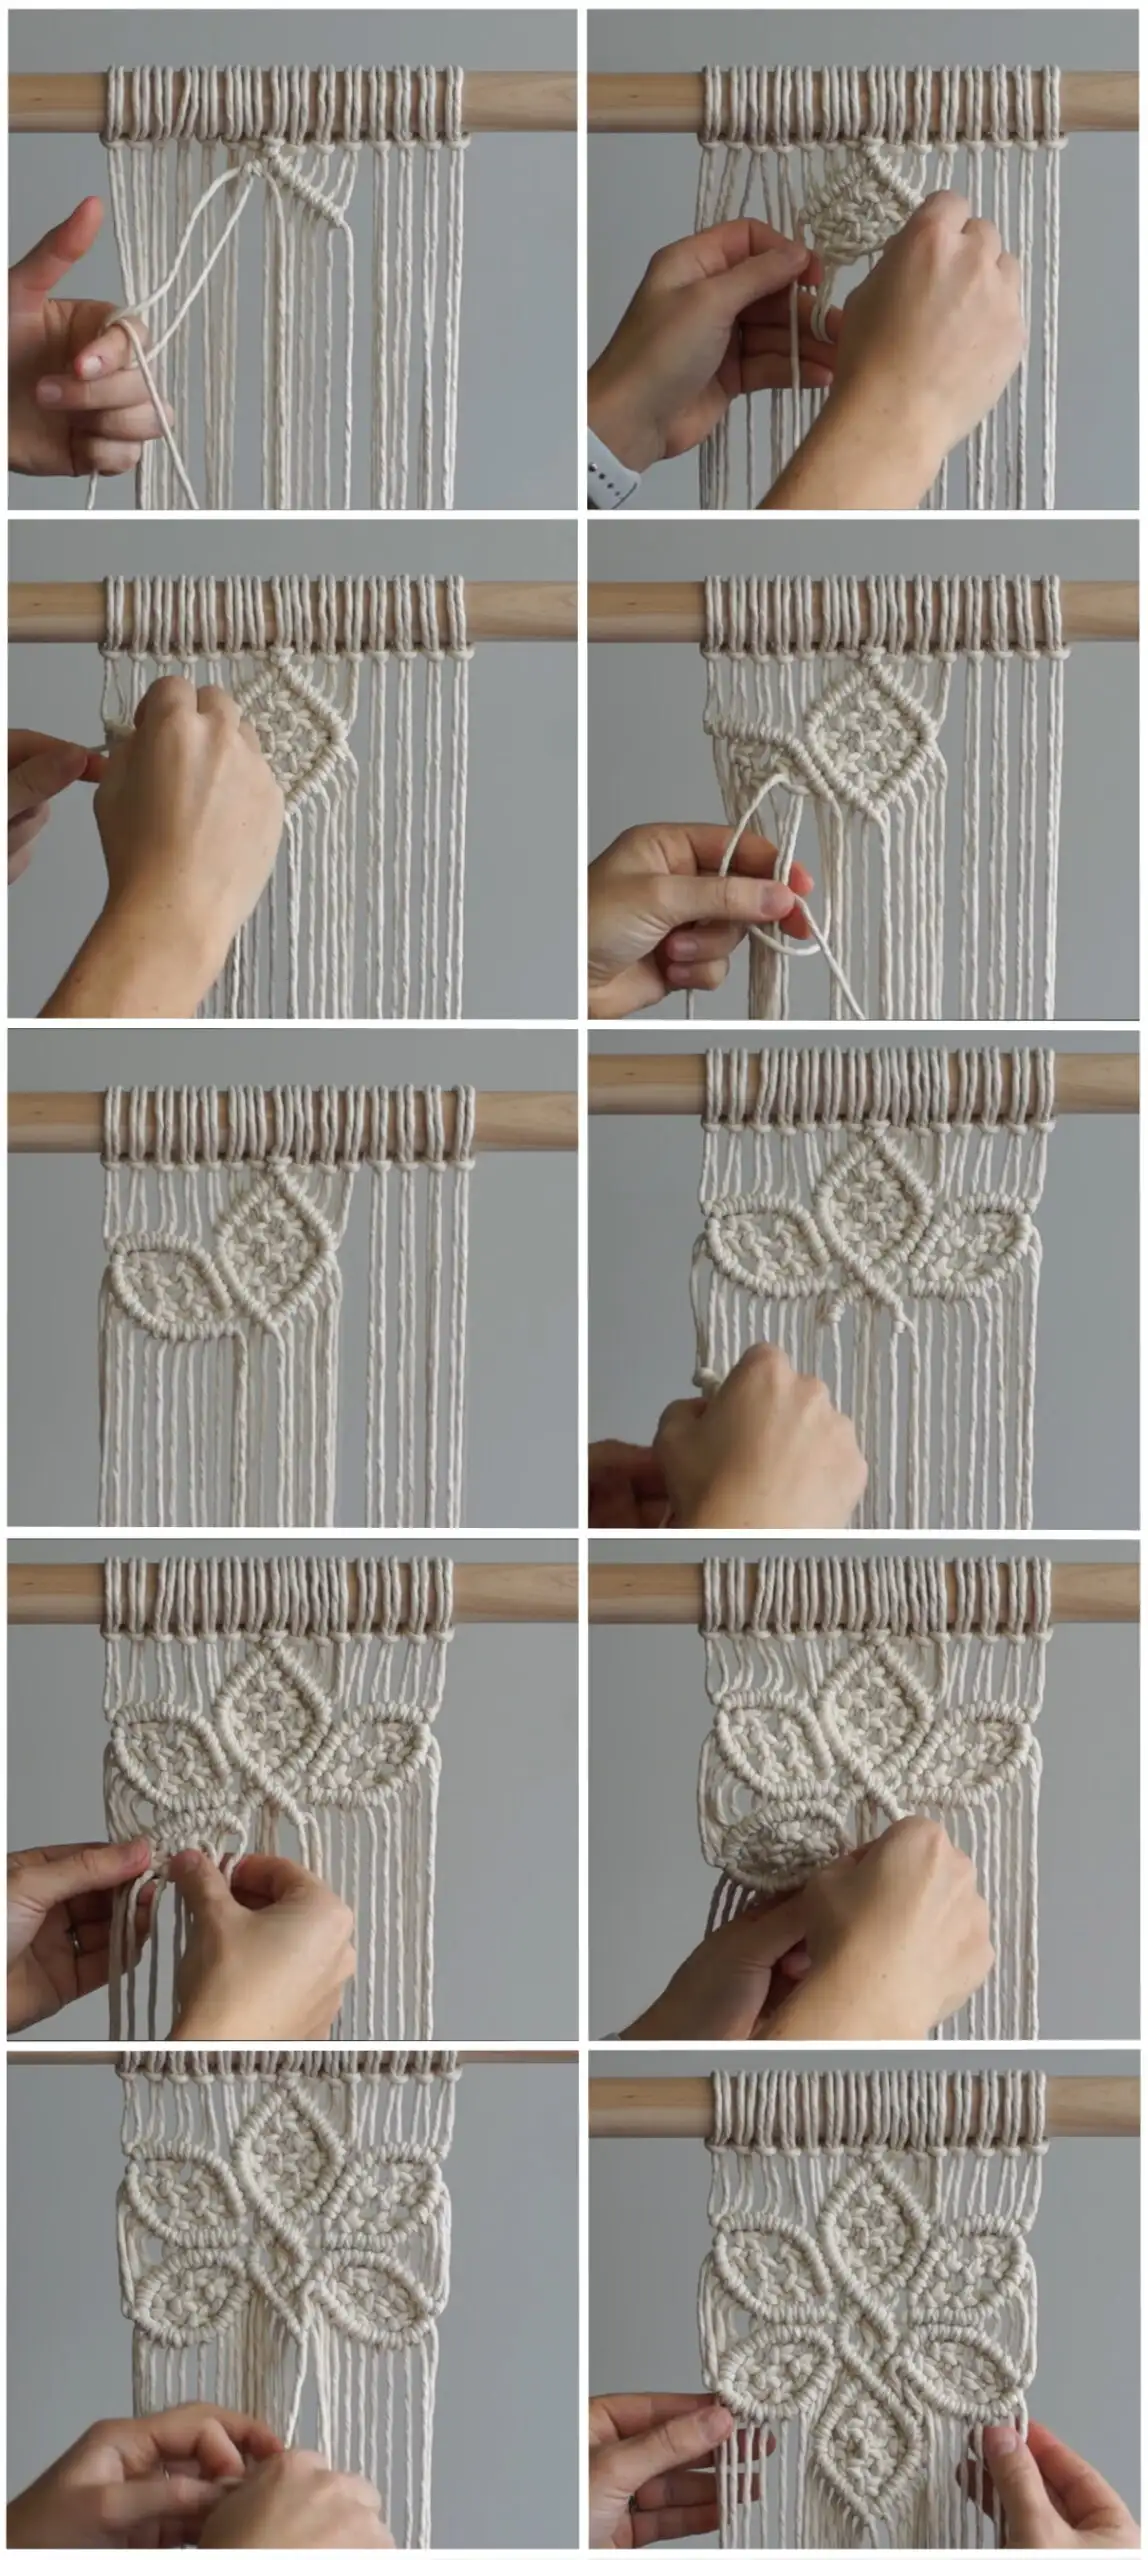 DIY Macrame Tutorial: Large 6 Petal Flower Using Double Half Hitch and Square Knots!